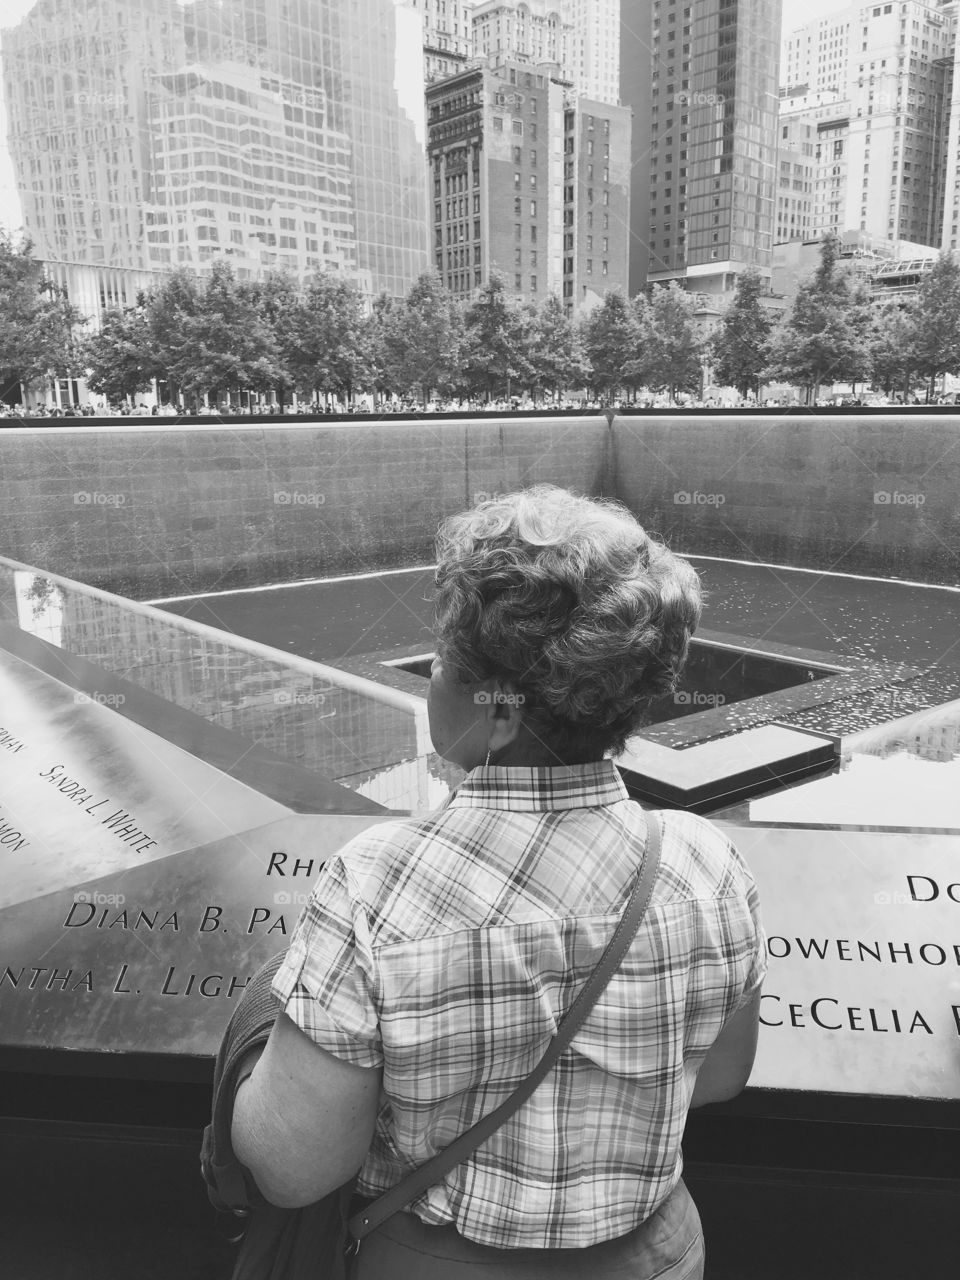 Remembering is reliving. 9/11 memorial NYC